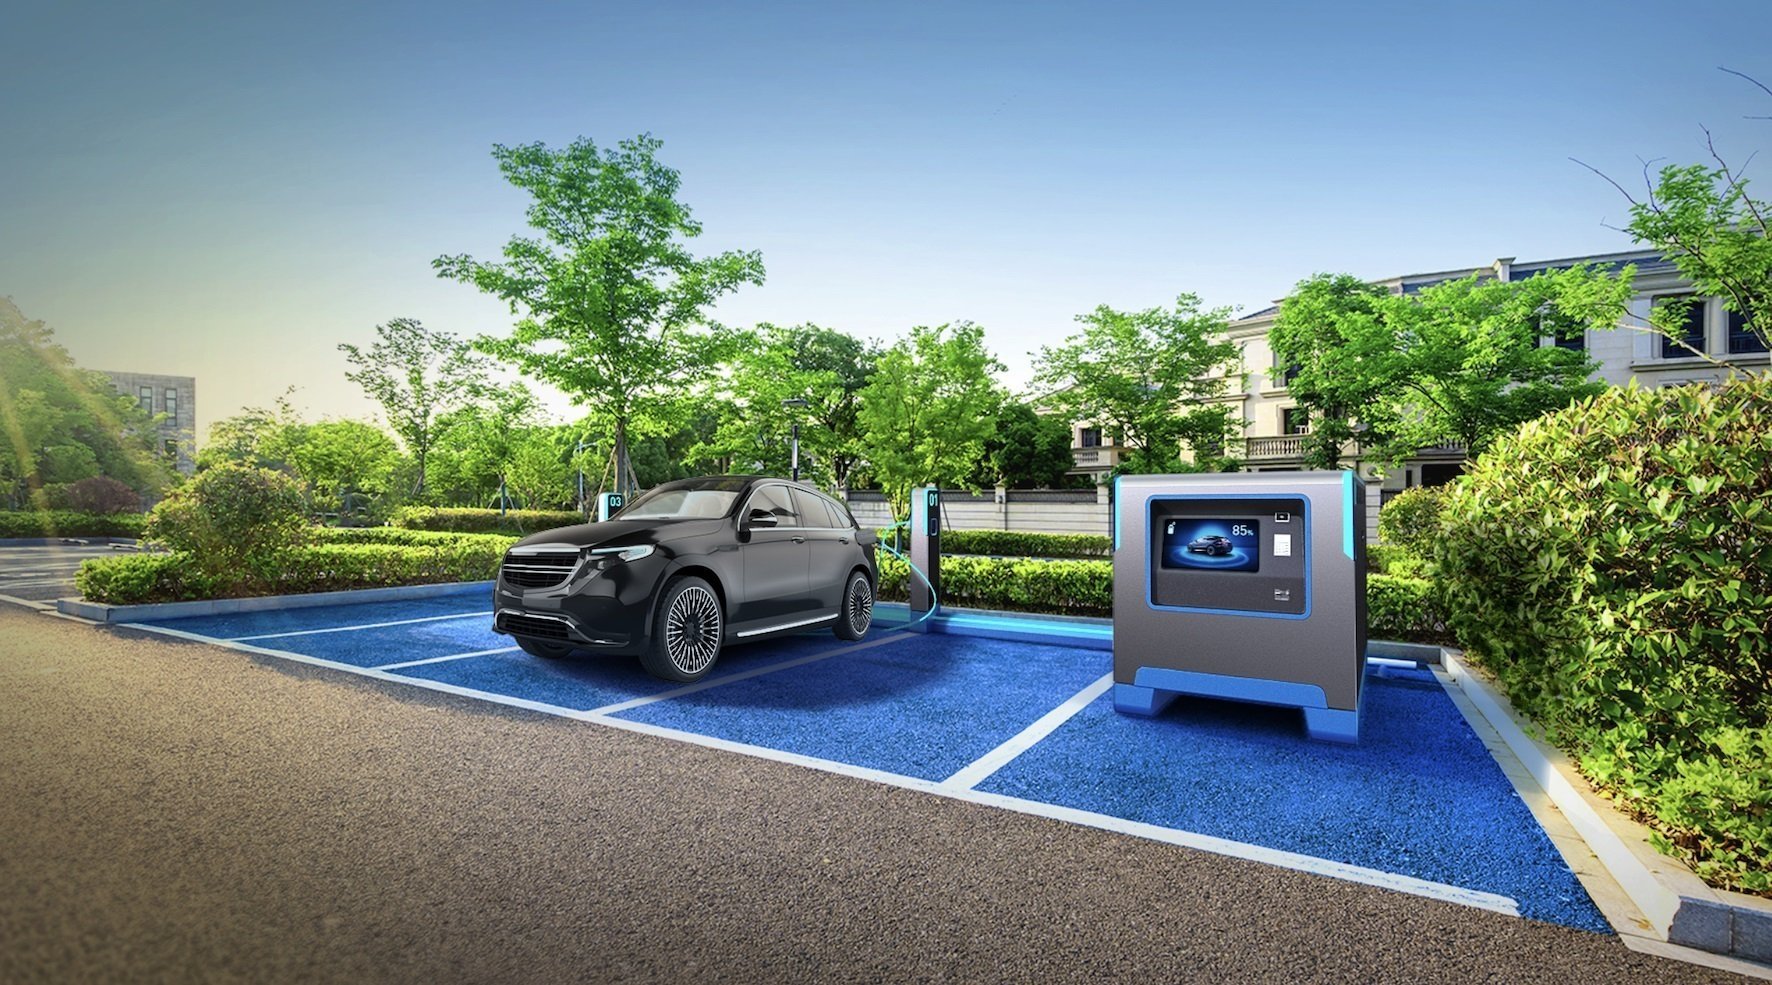  Electric vehicles: A startup plans a charging station via blockchain 